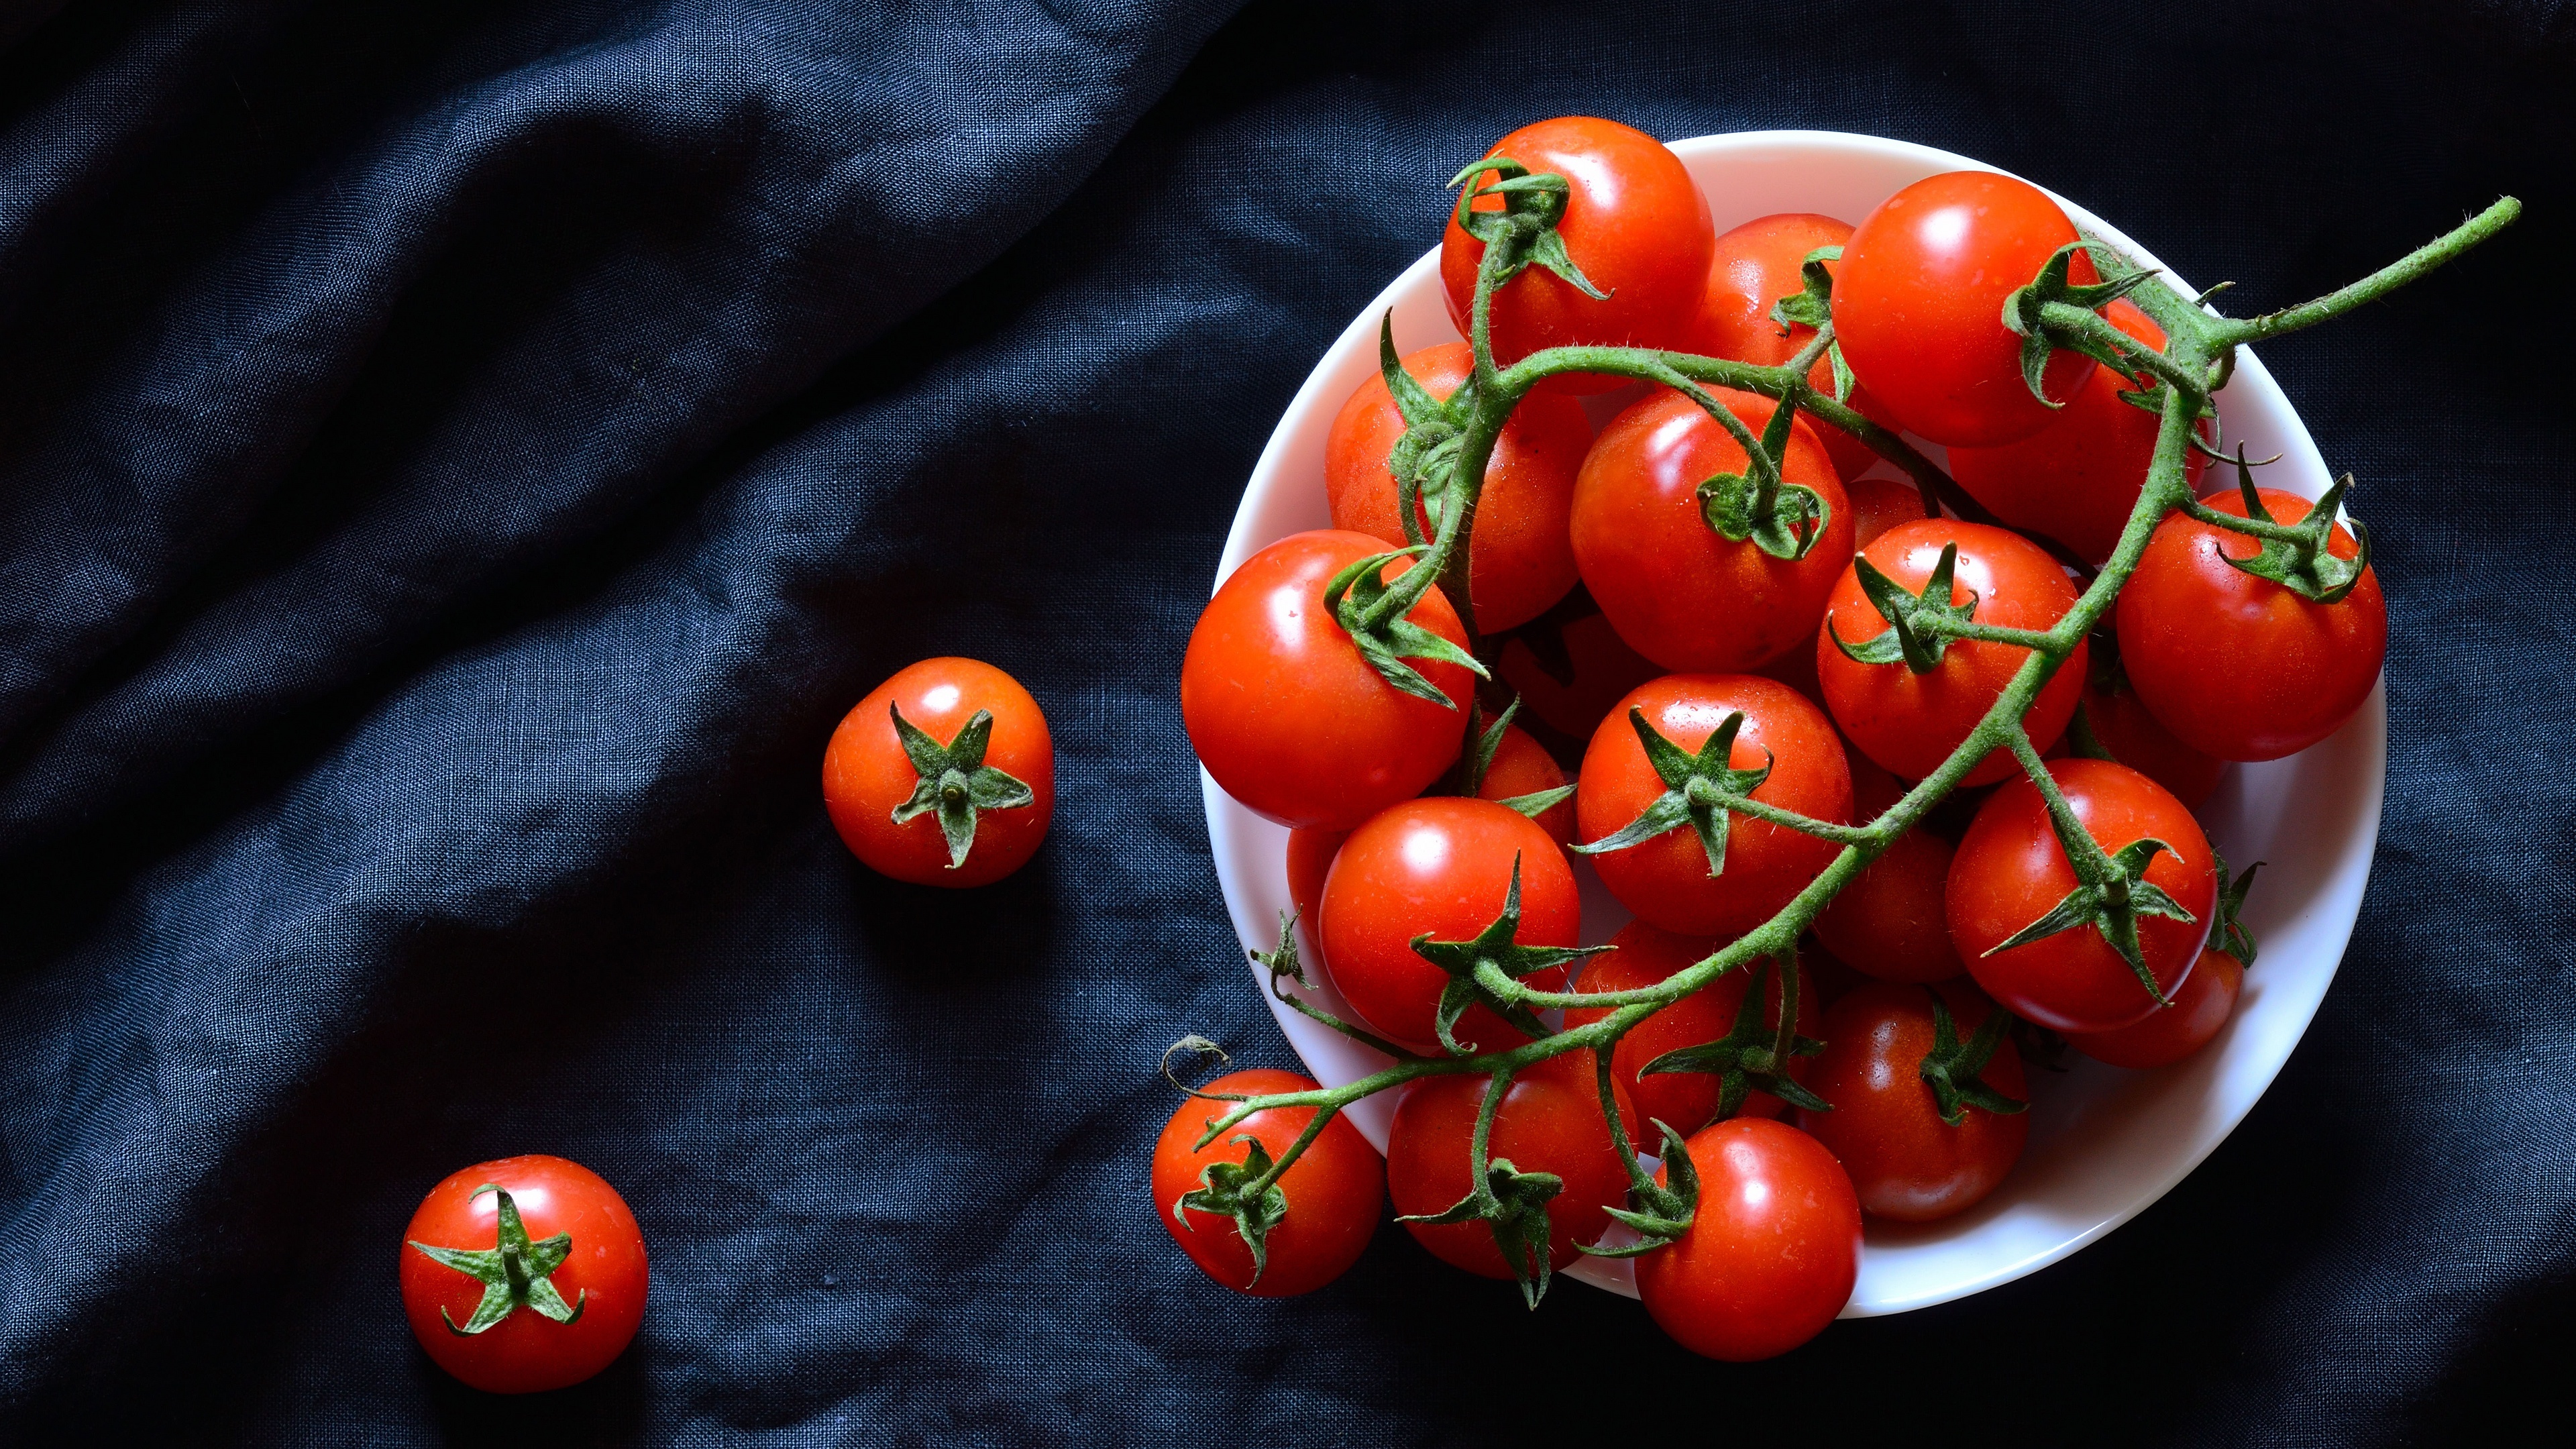 High-resolution tomato, Vibrant colors, Close-up imagery, Detailed photography, 3840x2160 4K Desktop